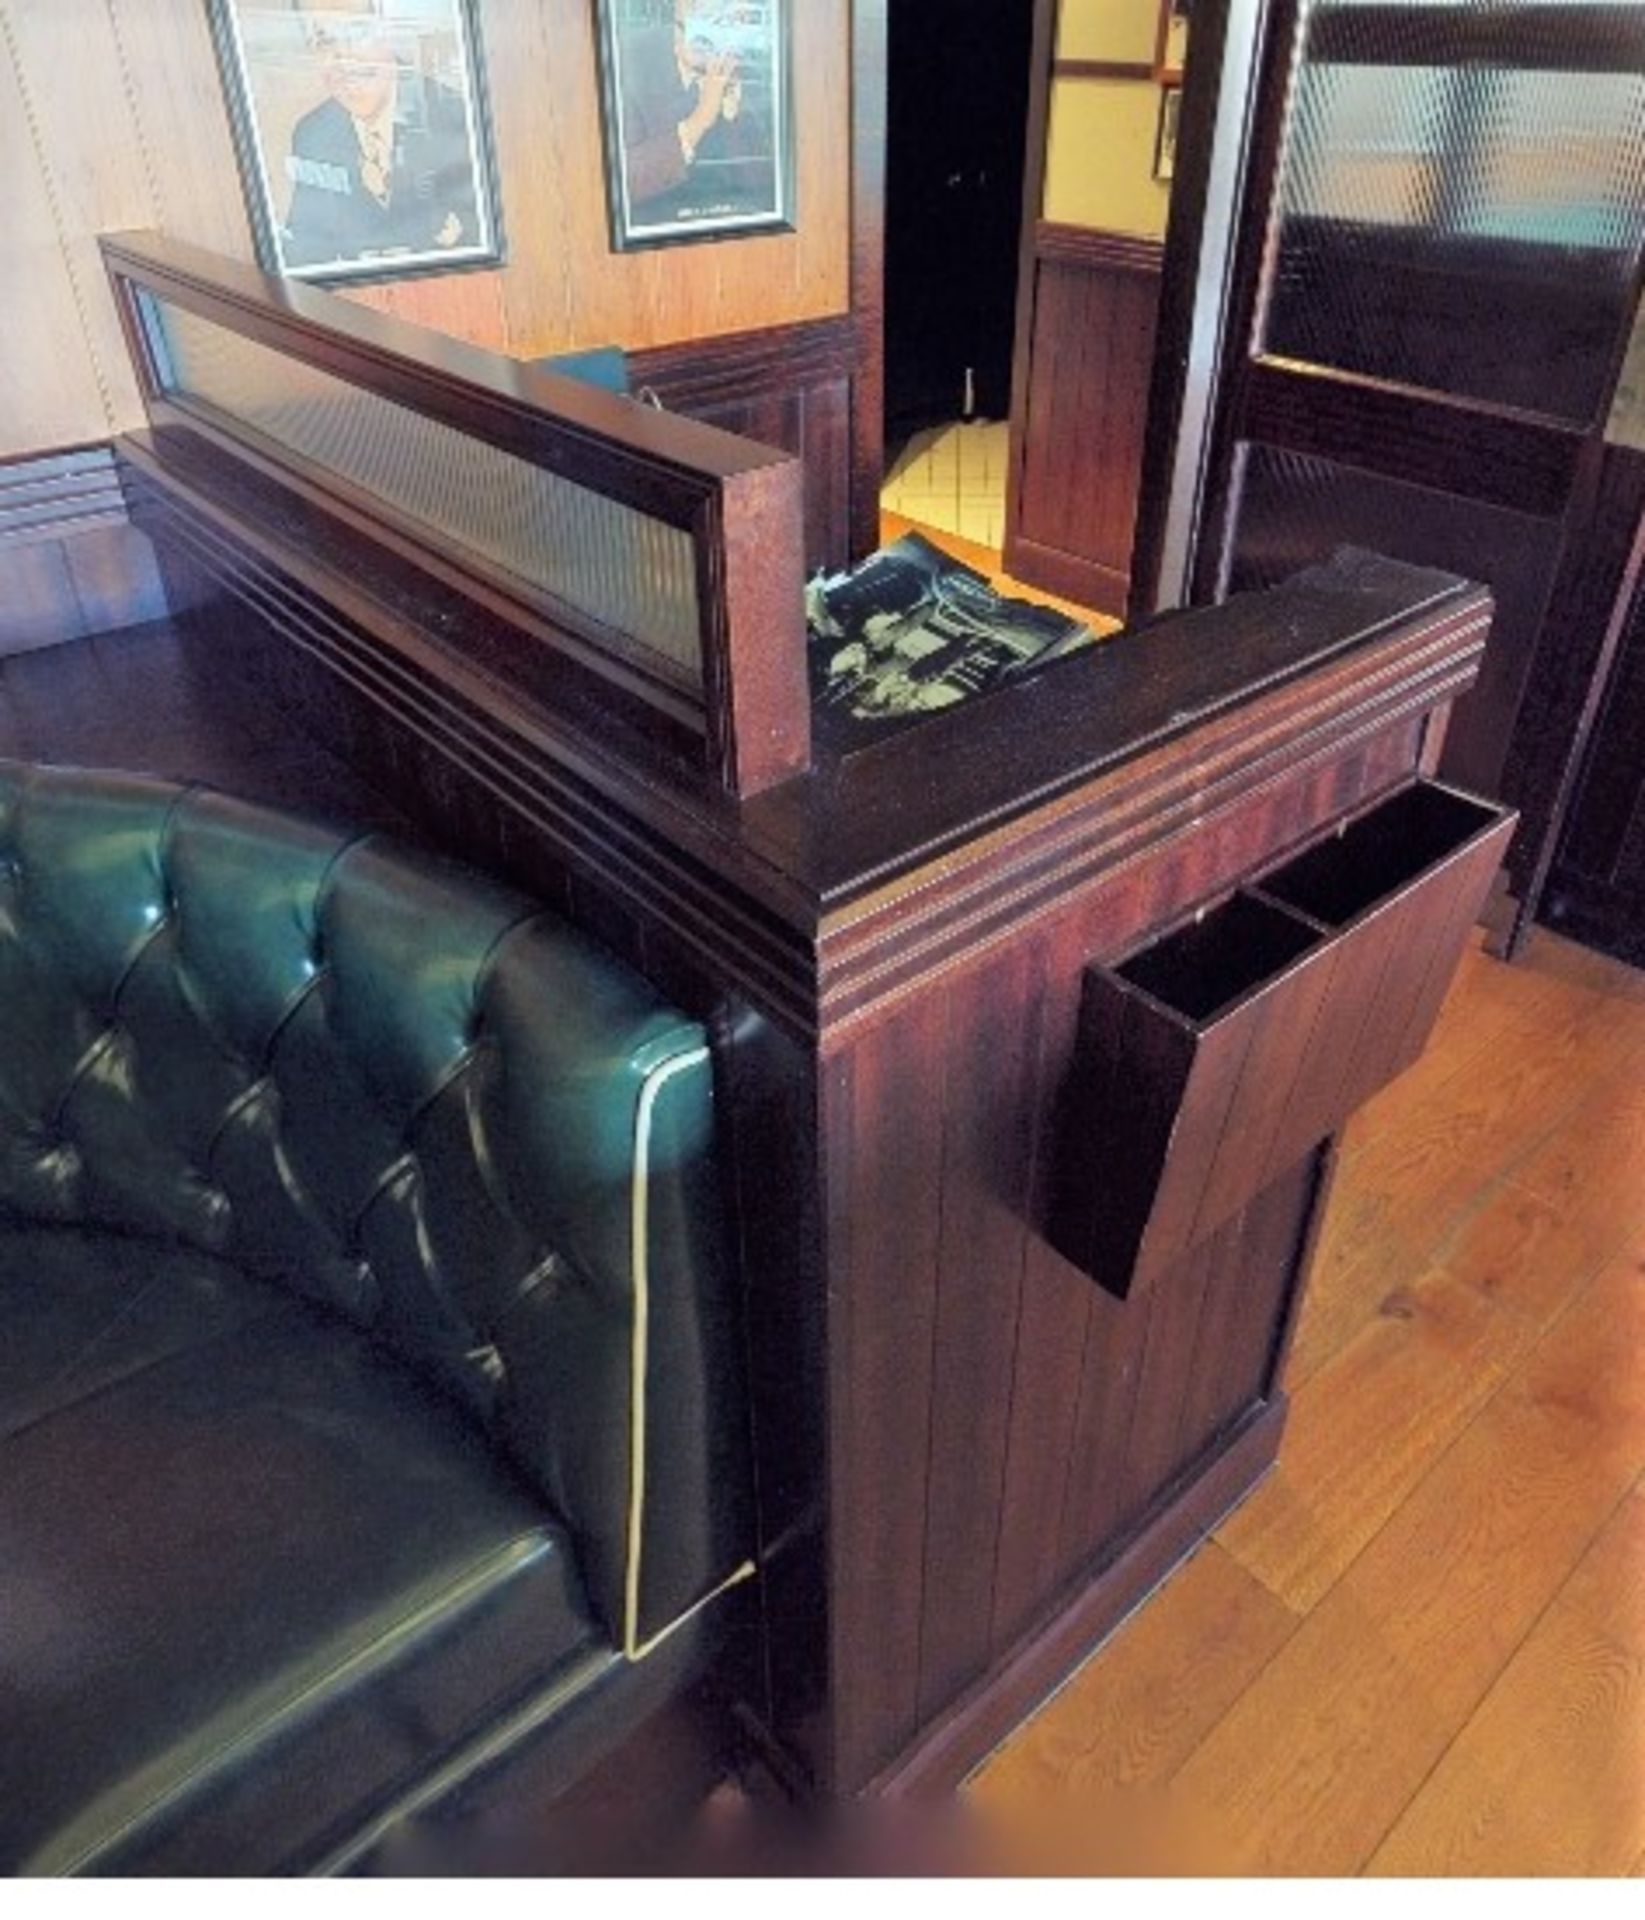 2 x Waiter Stations Featuring a Dark Wooden Finish, Menu Holders, Privacy Panels and Cupboards - - Image 8 of 8